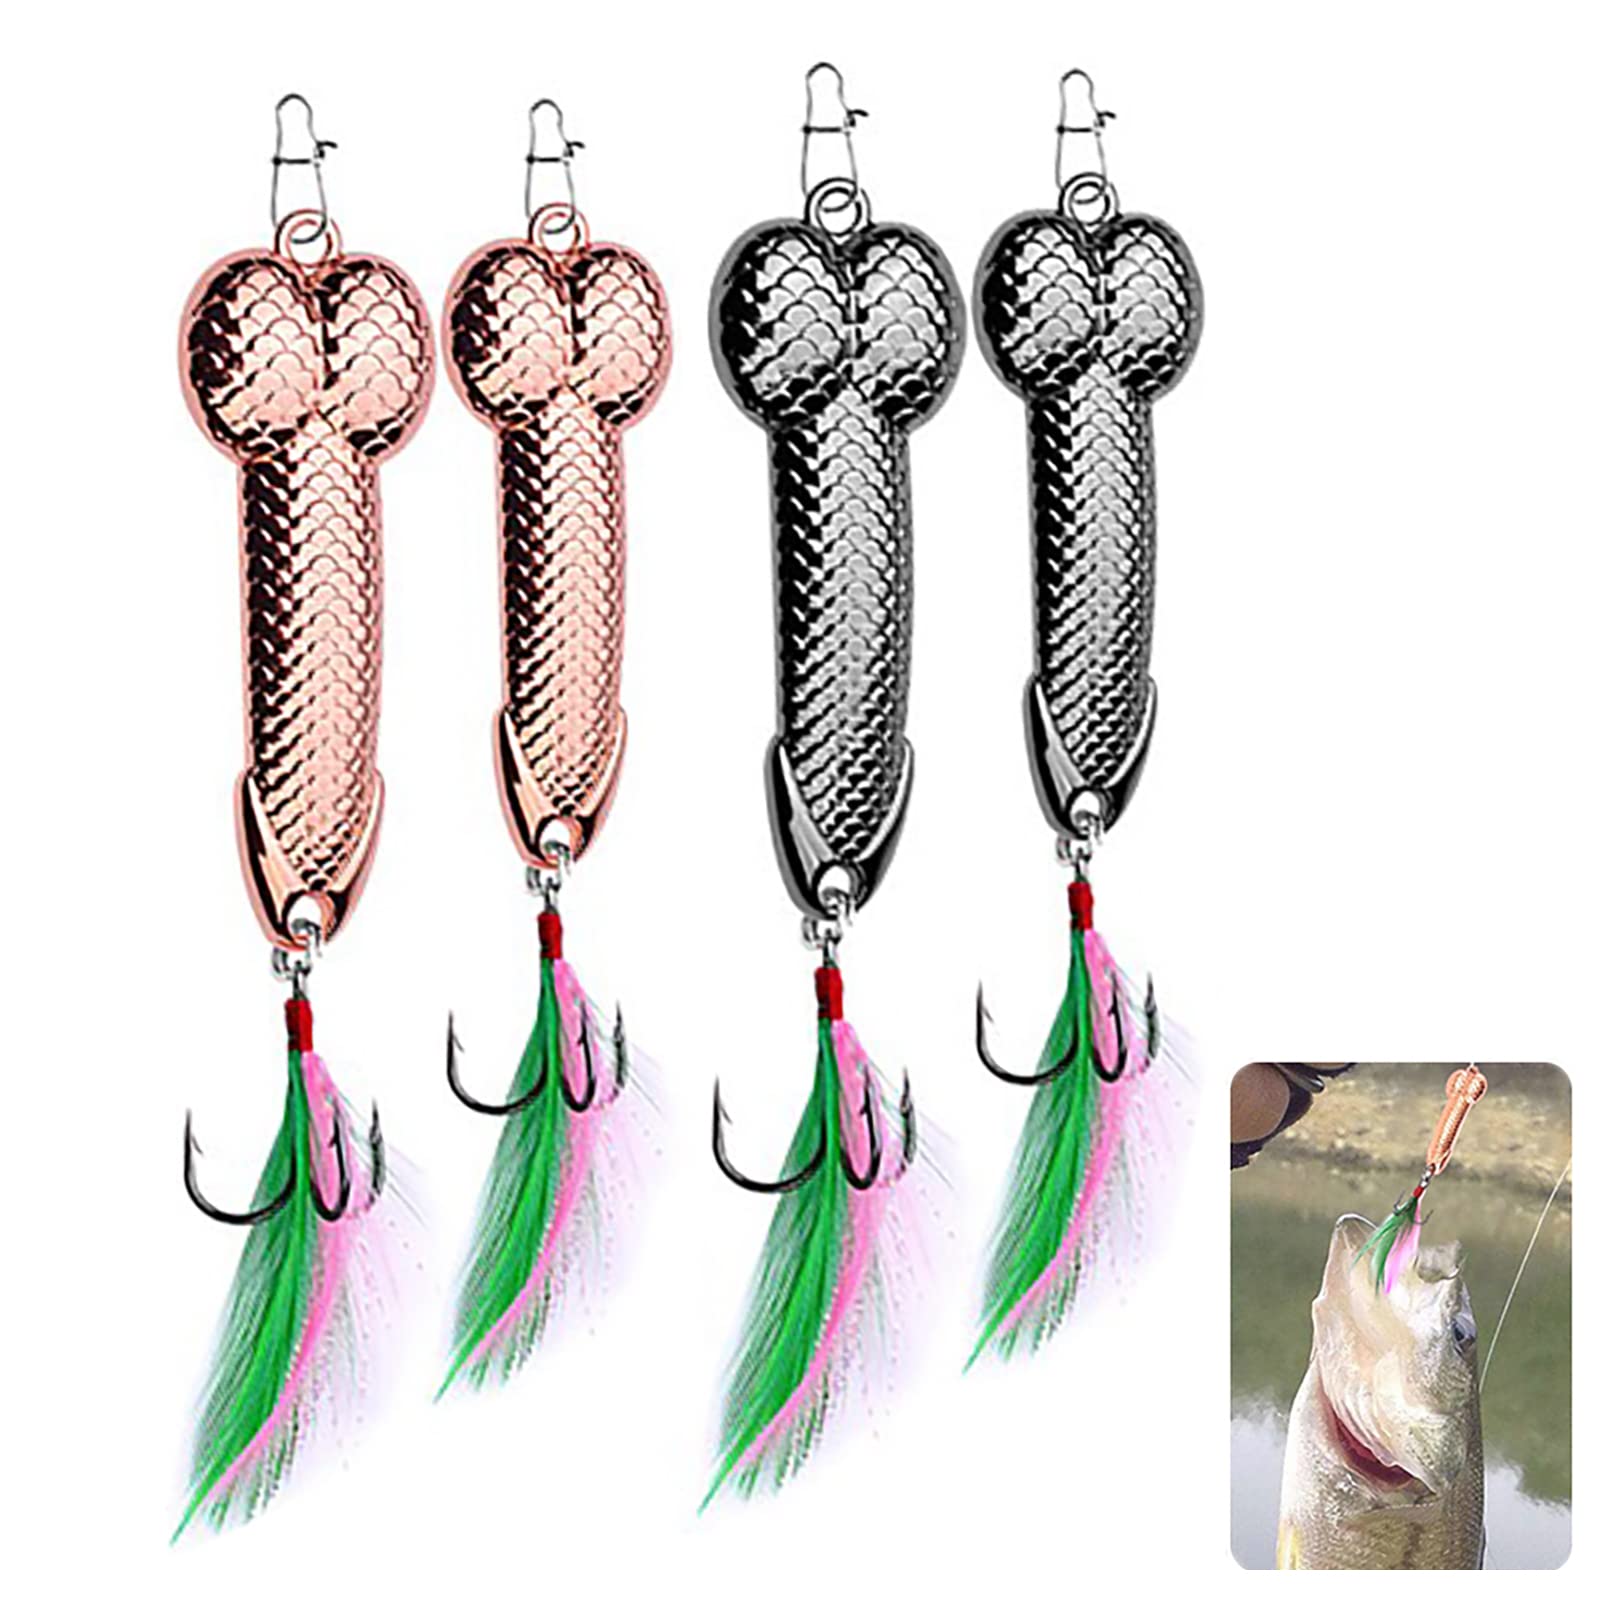 4PCS Funny Fishing Lures Special Shaped Hard Metal Sequin Fishing Jigs  Baits Jewfish Gifts Bass Spoons Lures Spoof, Spoons -  Canada